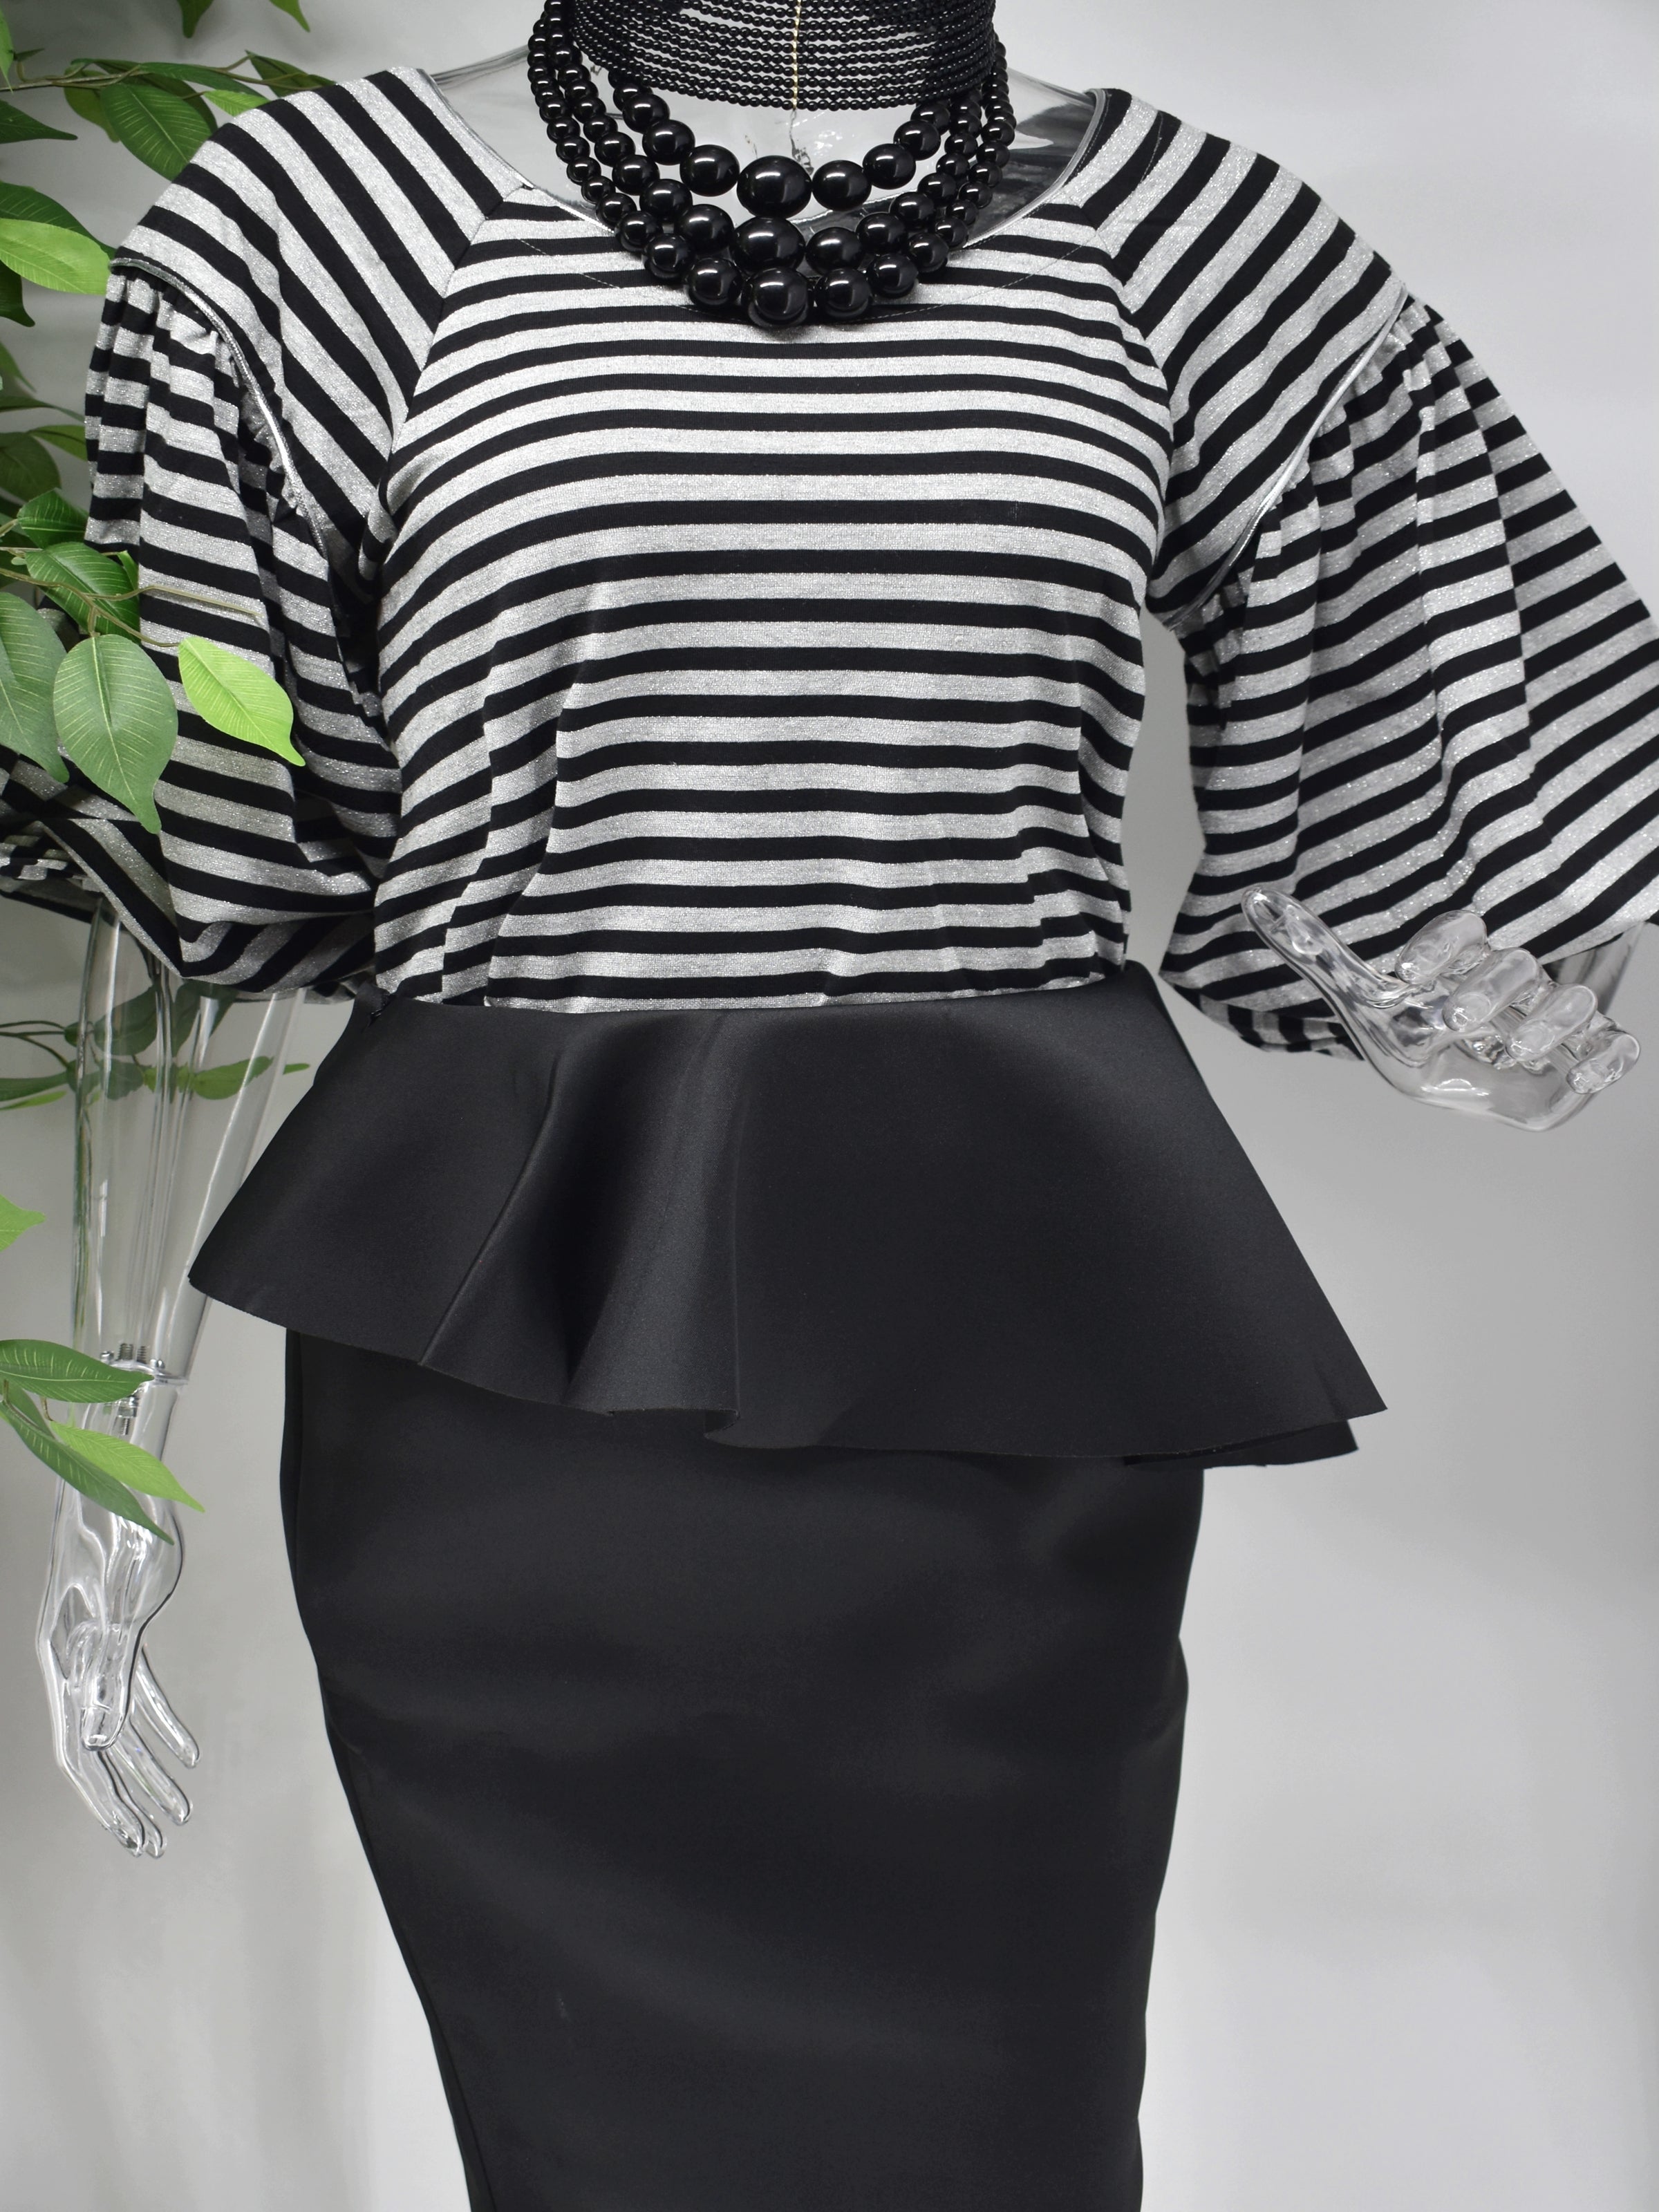 Bring a modern design to a classic staple when you step out in our Bobette stripe top. Bobette has a black and gray striped design with a bateau neckline that is beautifully paired with our high fashion puffed bell sleeve.